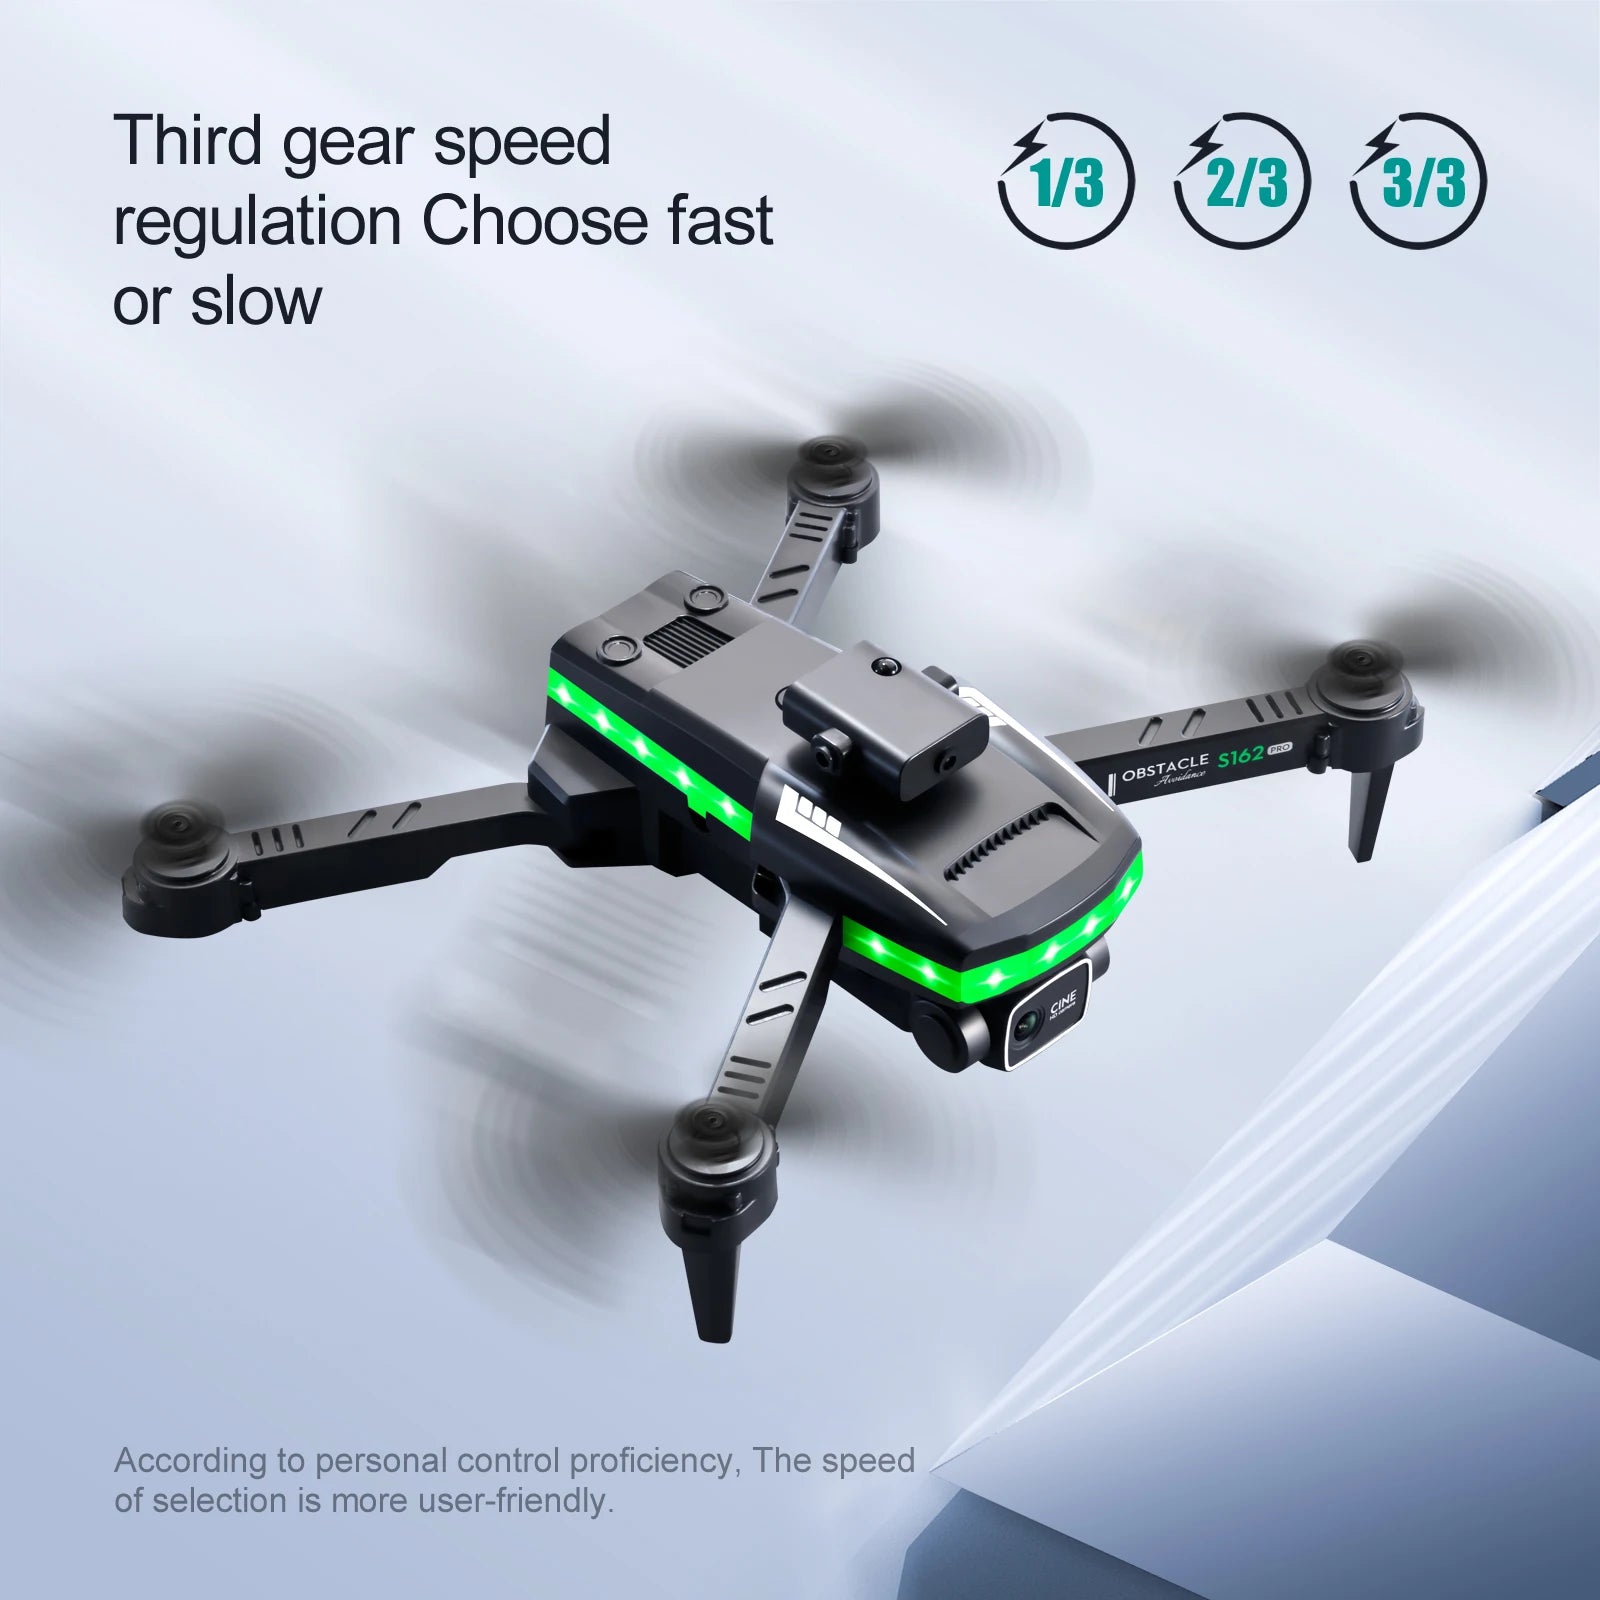 S162 Pro Drone, third gear speed 1/3 2/3 3/3 regulation choose fast or slow according